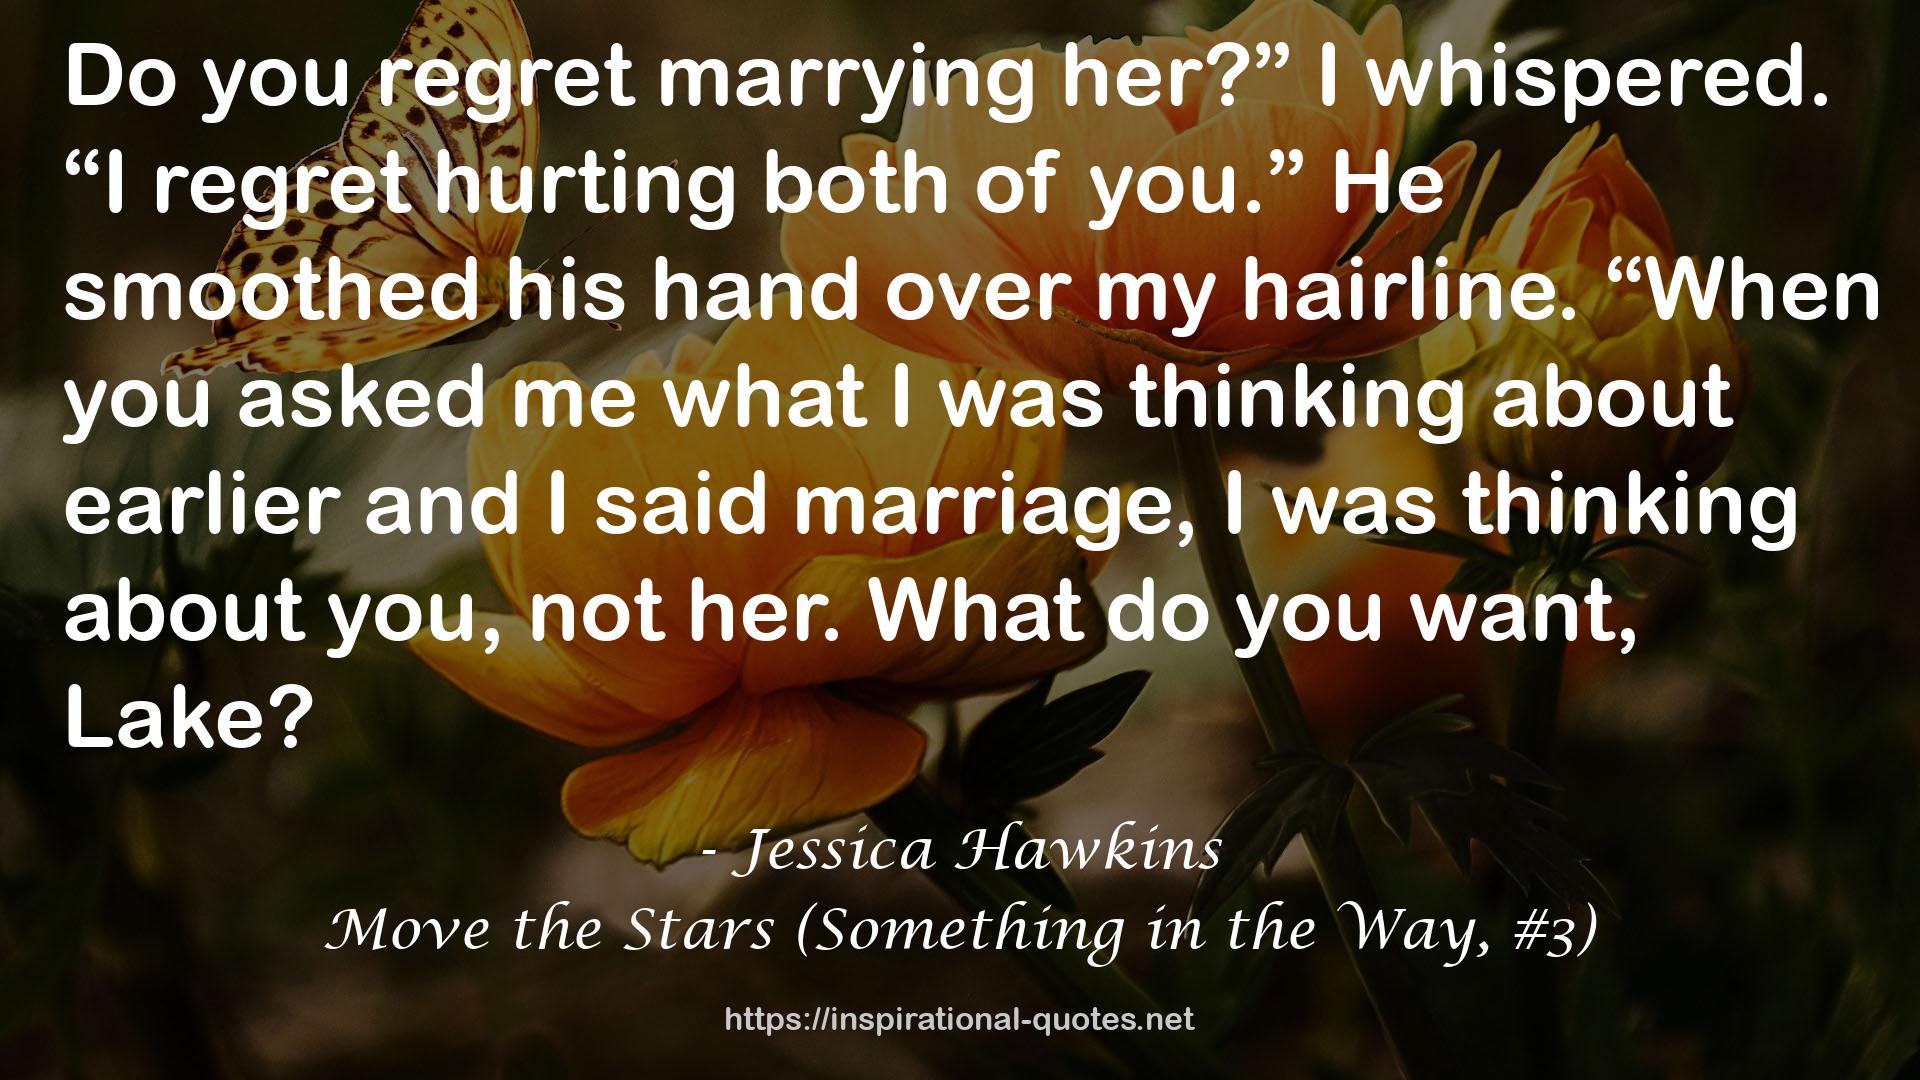 Move the Stars (Something in the Way, #3) QUOTES